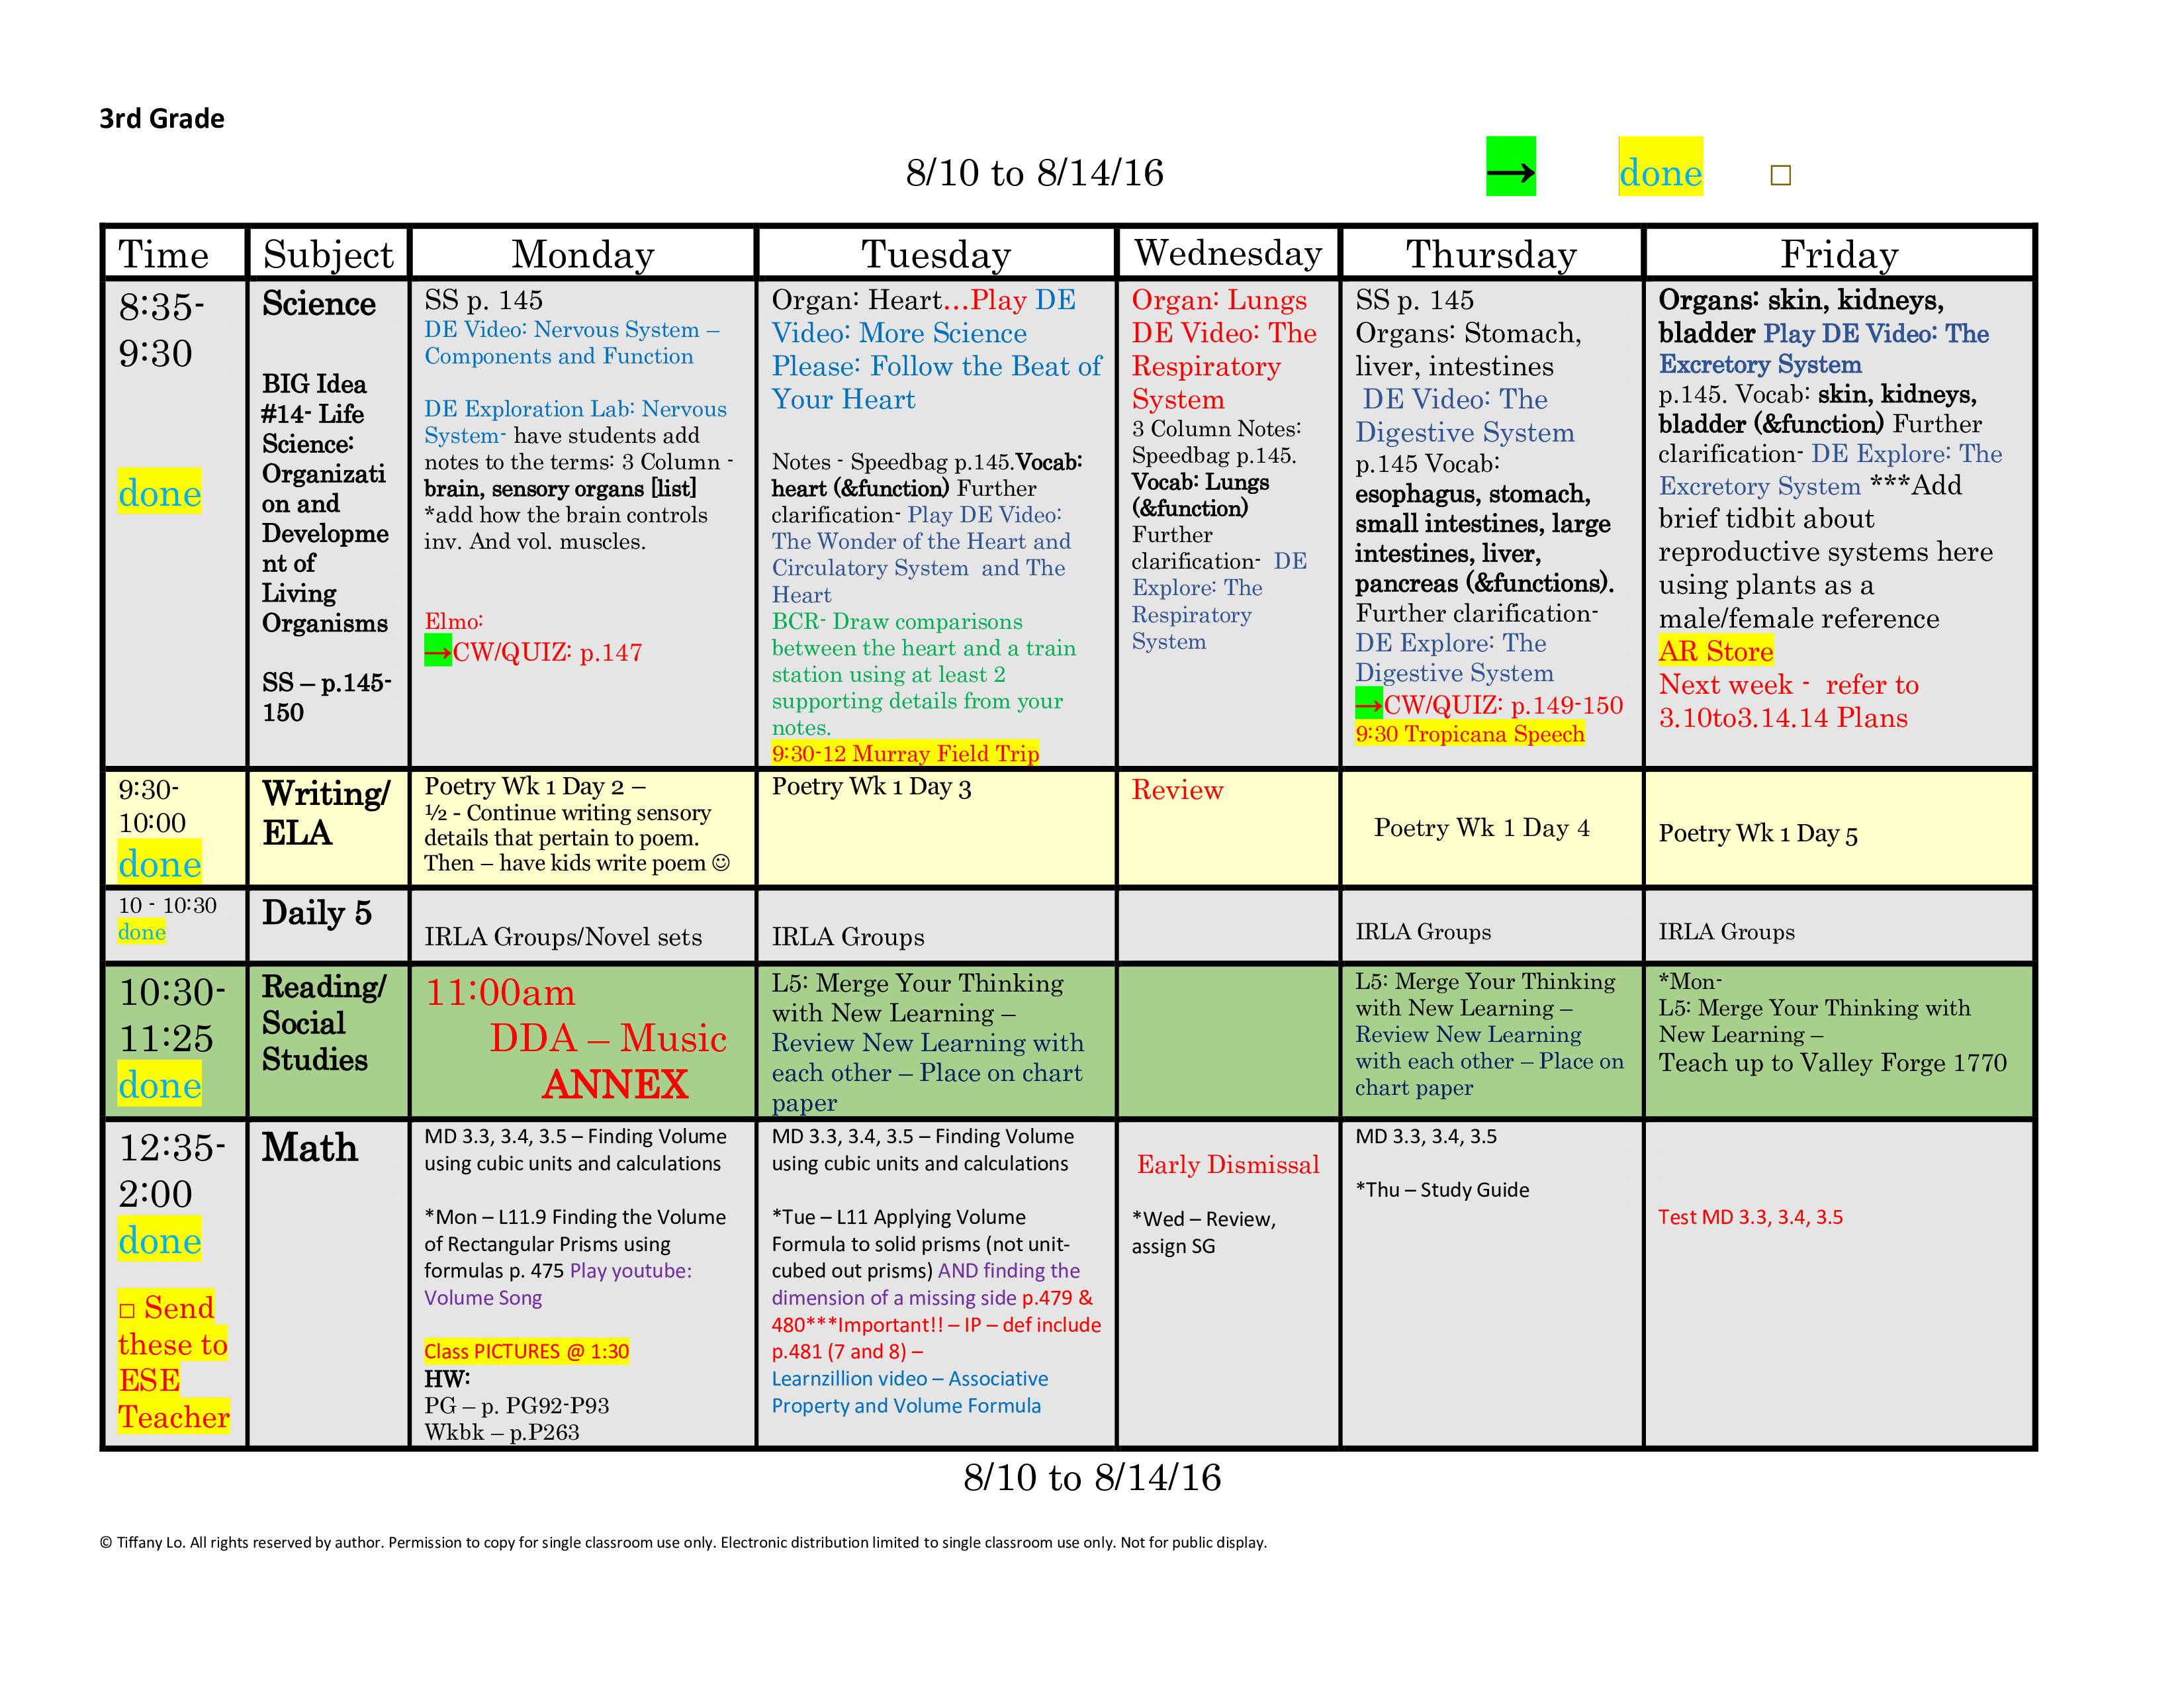 3rd third grade lesson plan template one week one page glance of all